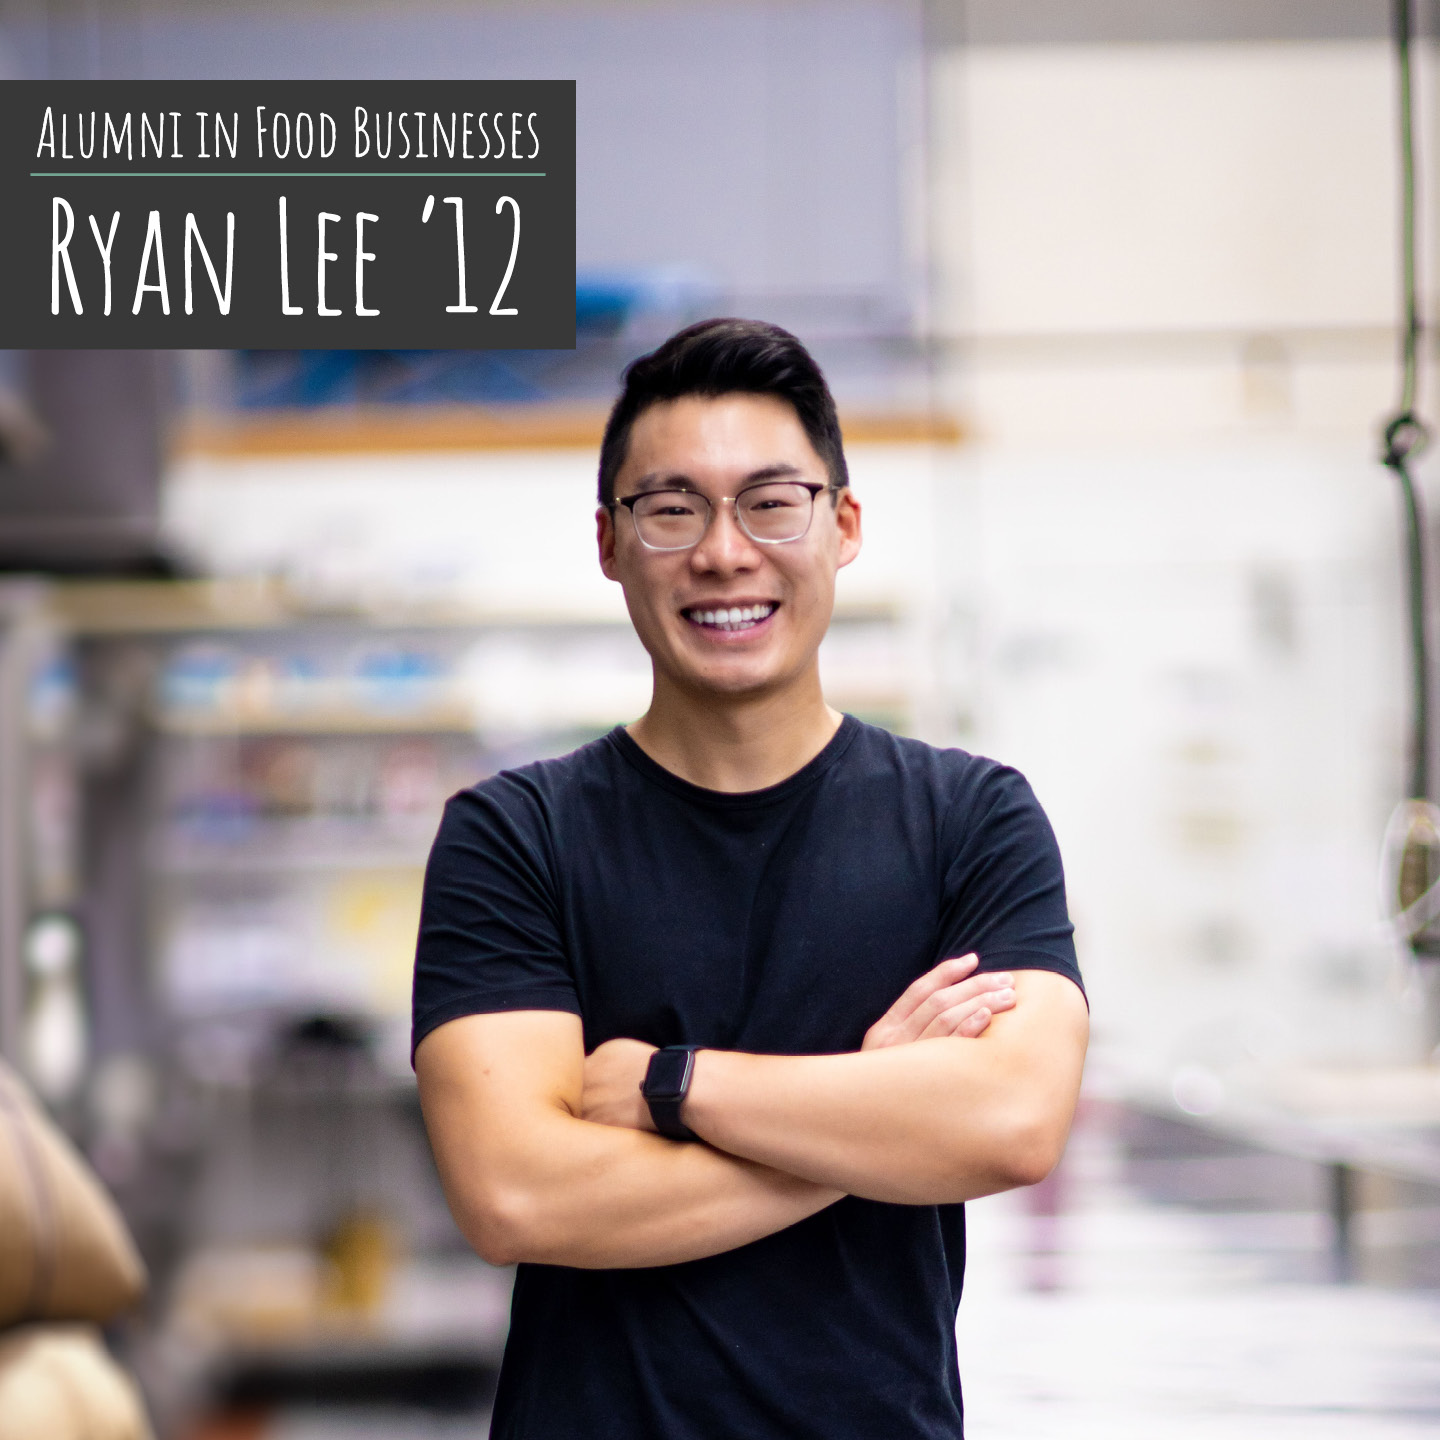 Ryan Lee ’12 | The Freedom to Explore (Alumni in Food Businesses)